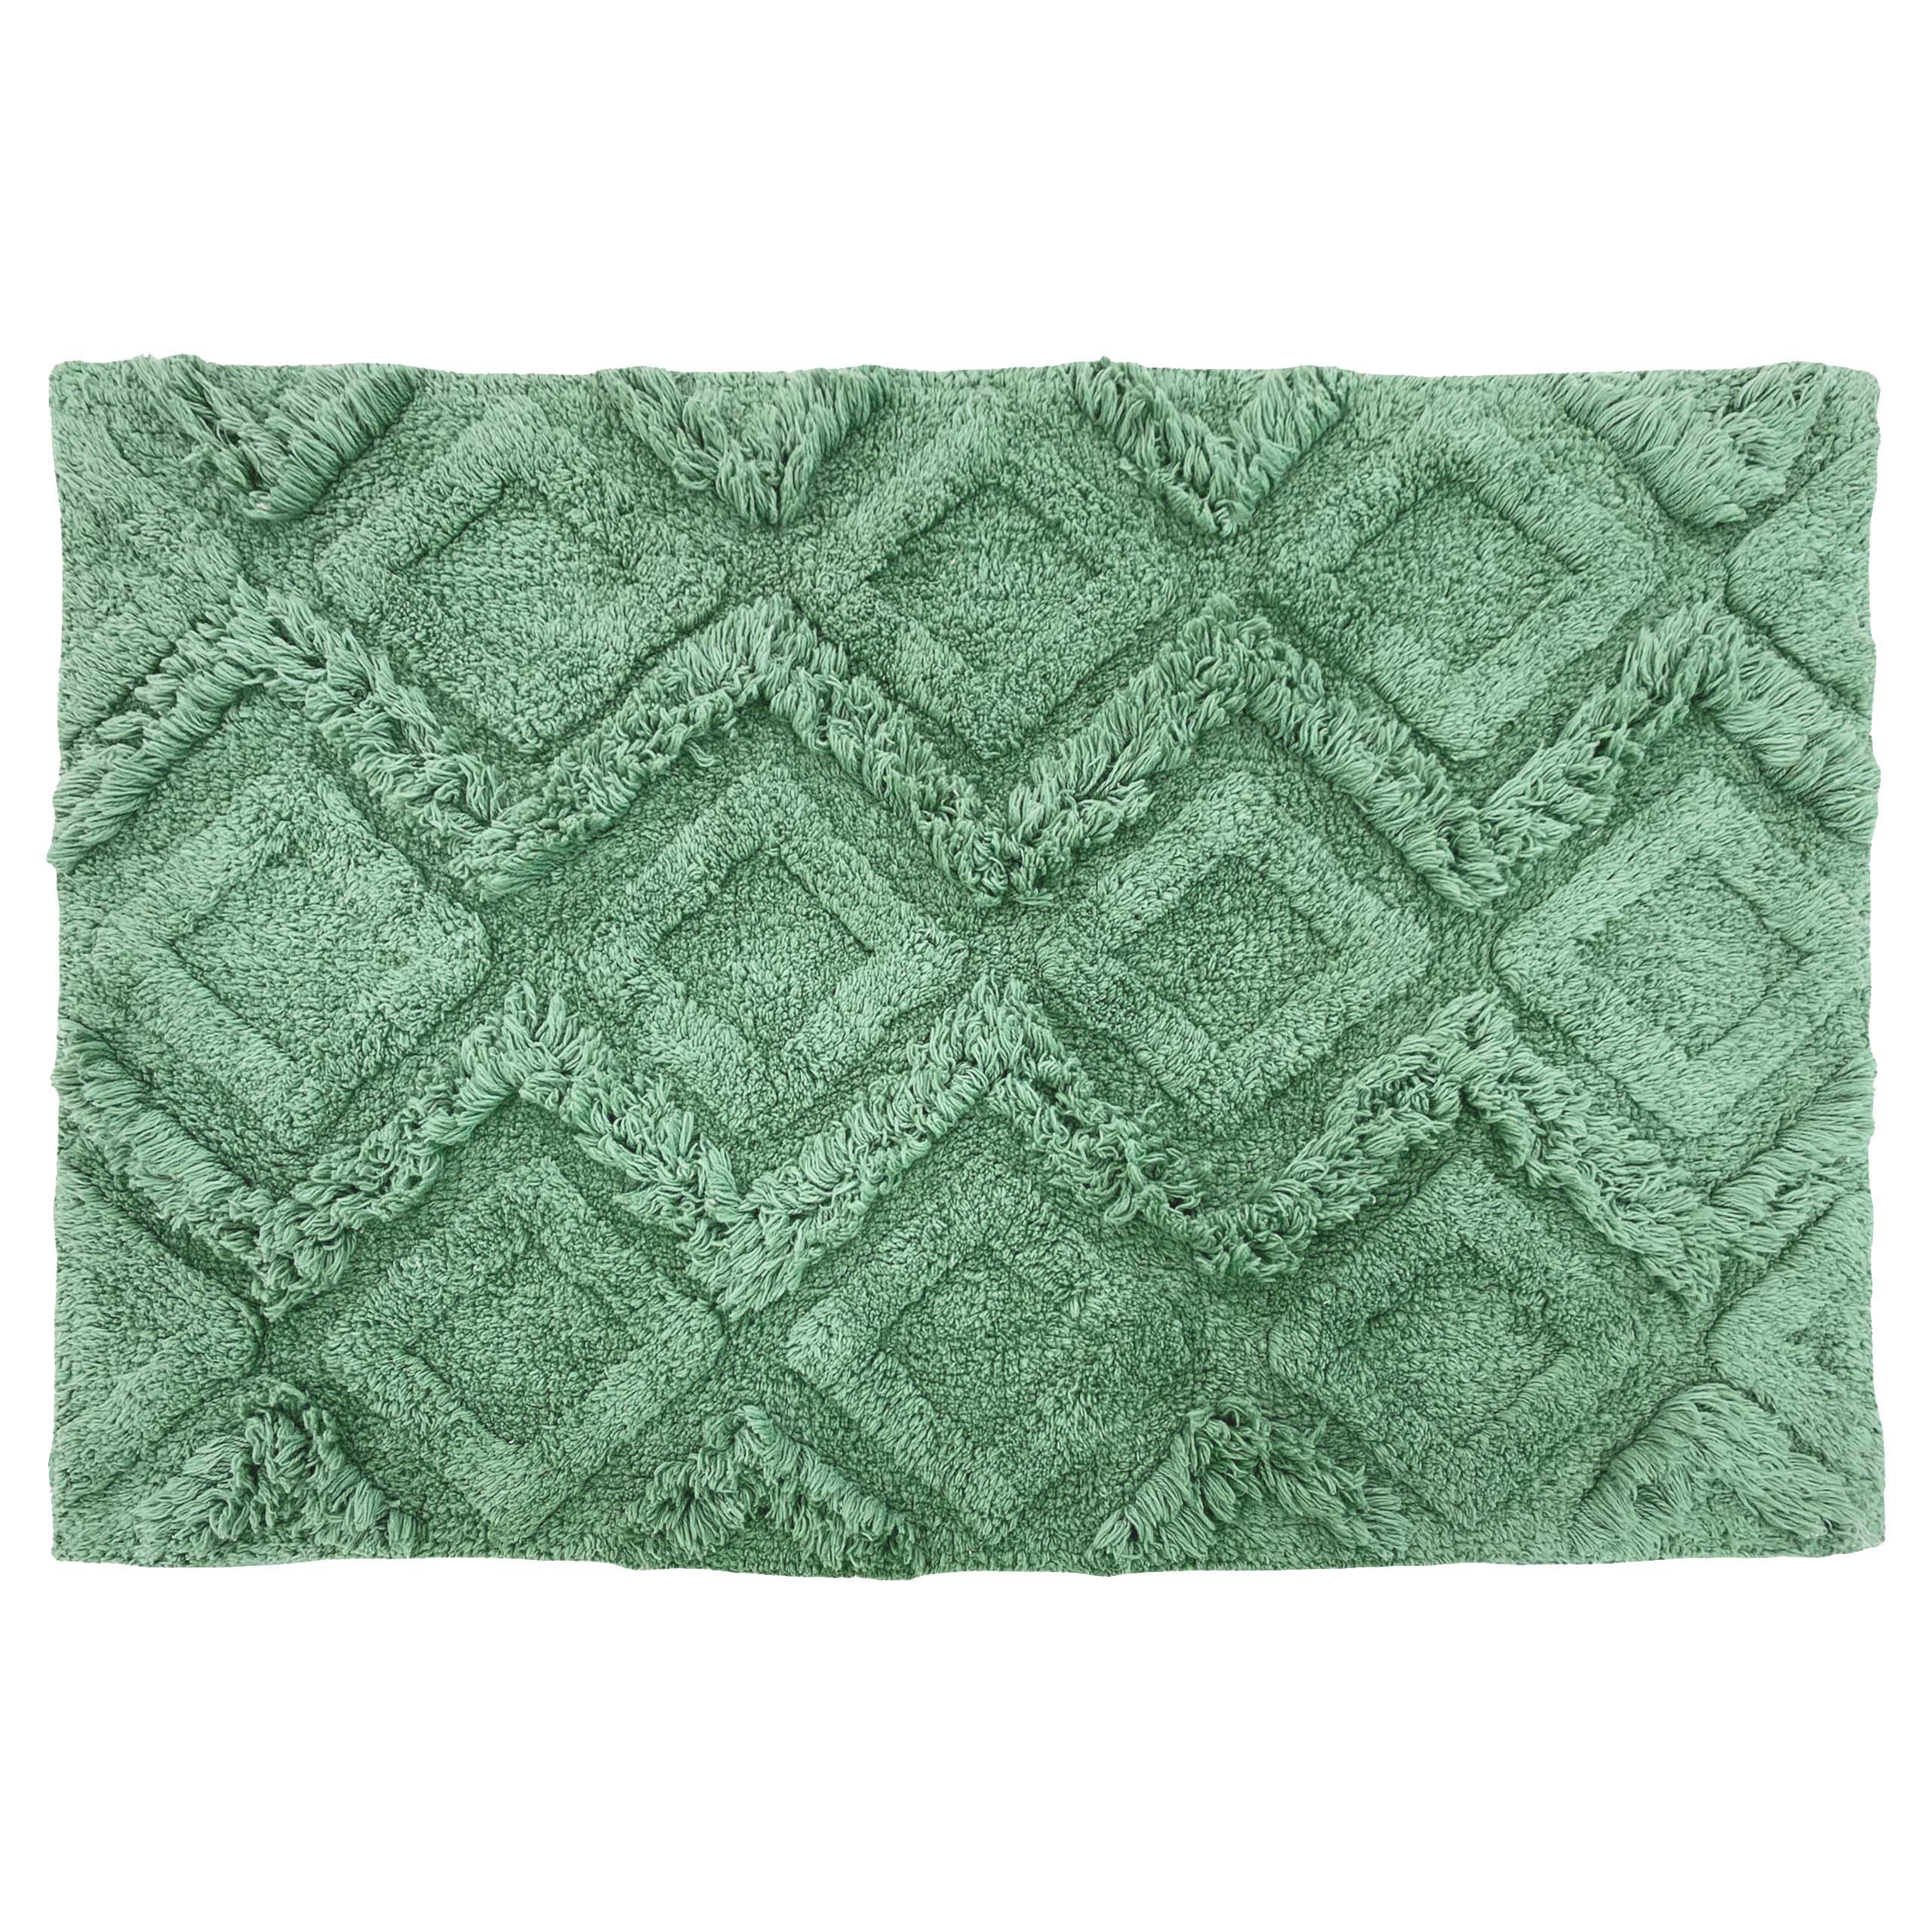 Celebrating an iconic global design, the Diamond cotton tufted bath mat has a wonderfully soft underfoot, and is also quick-drying with an anti-slip quality, keeping it in place on your bathroom floor.